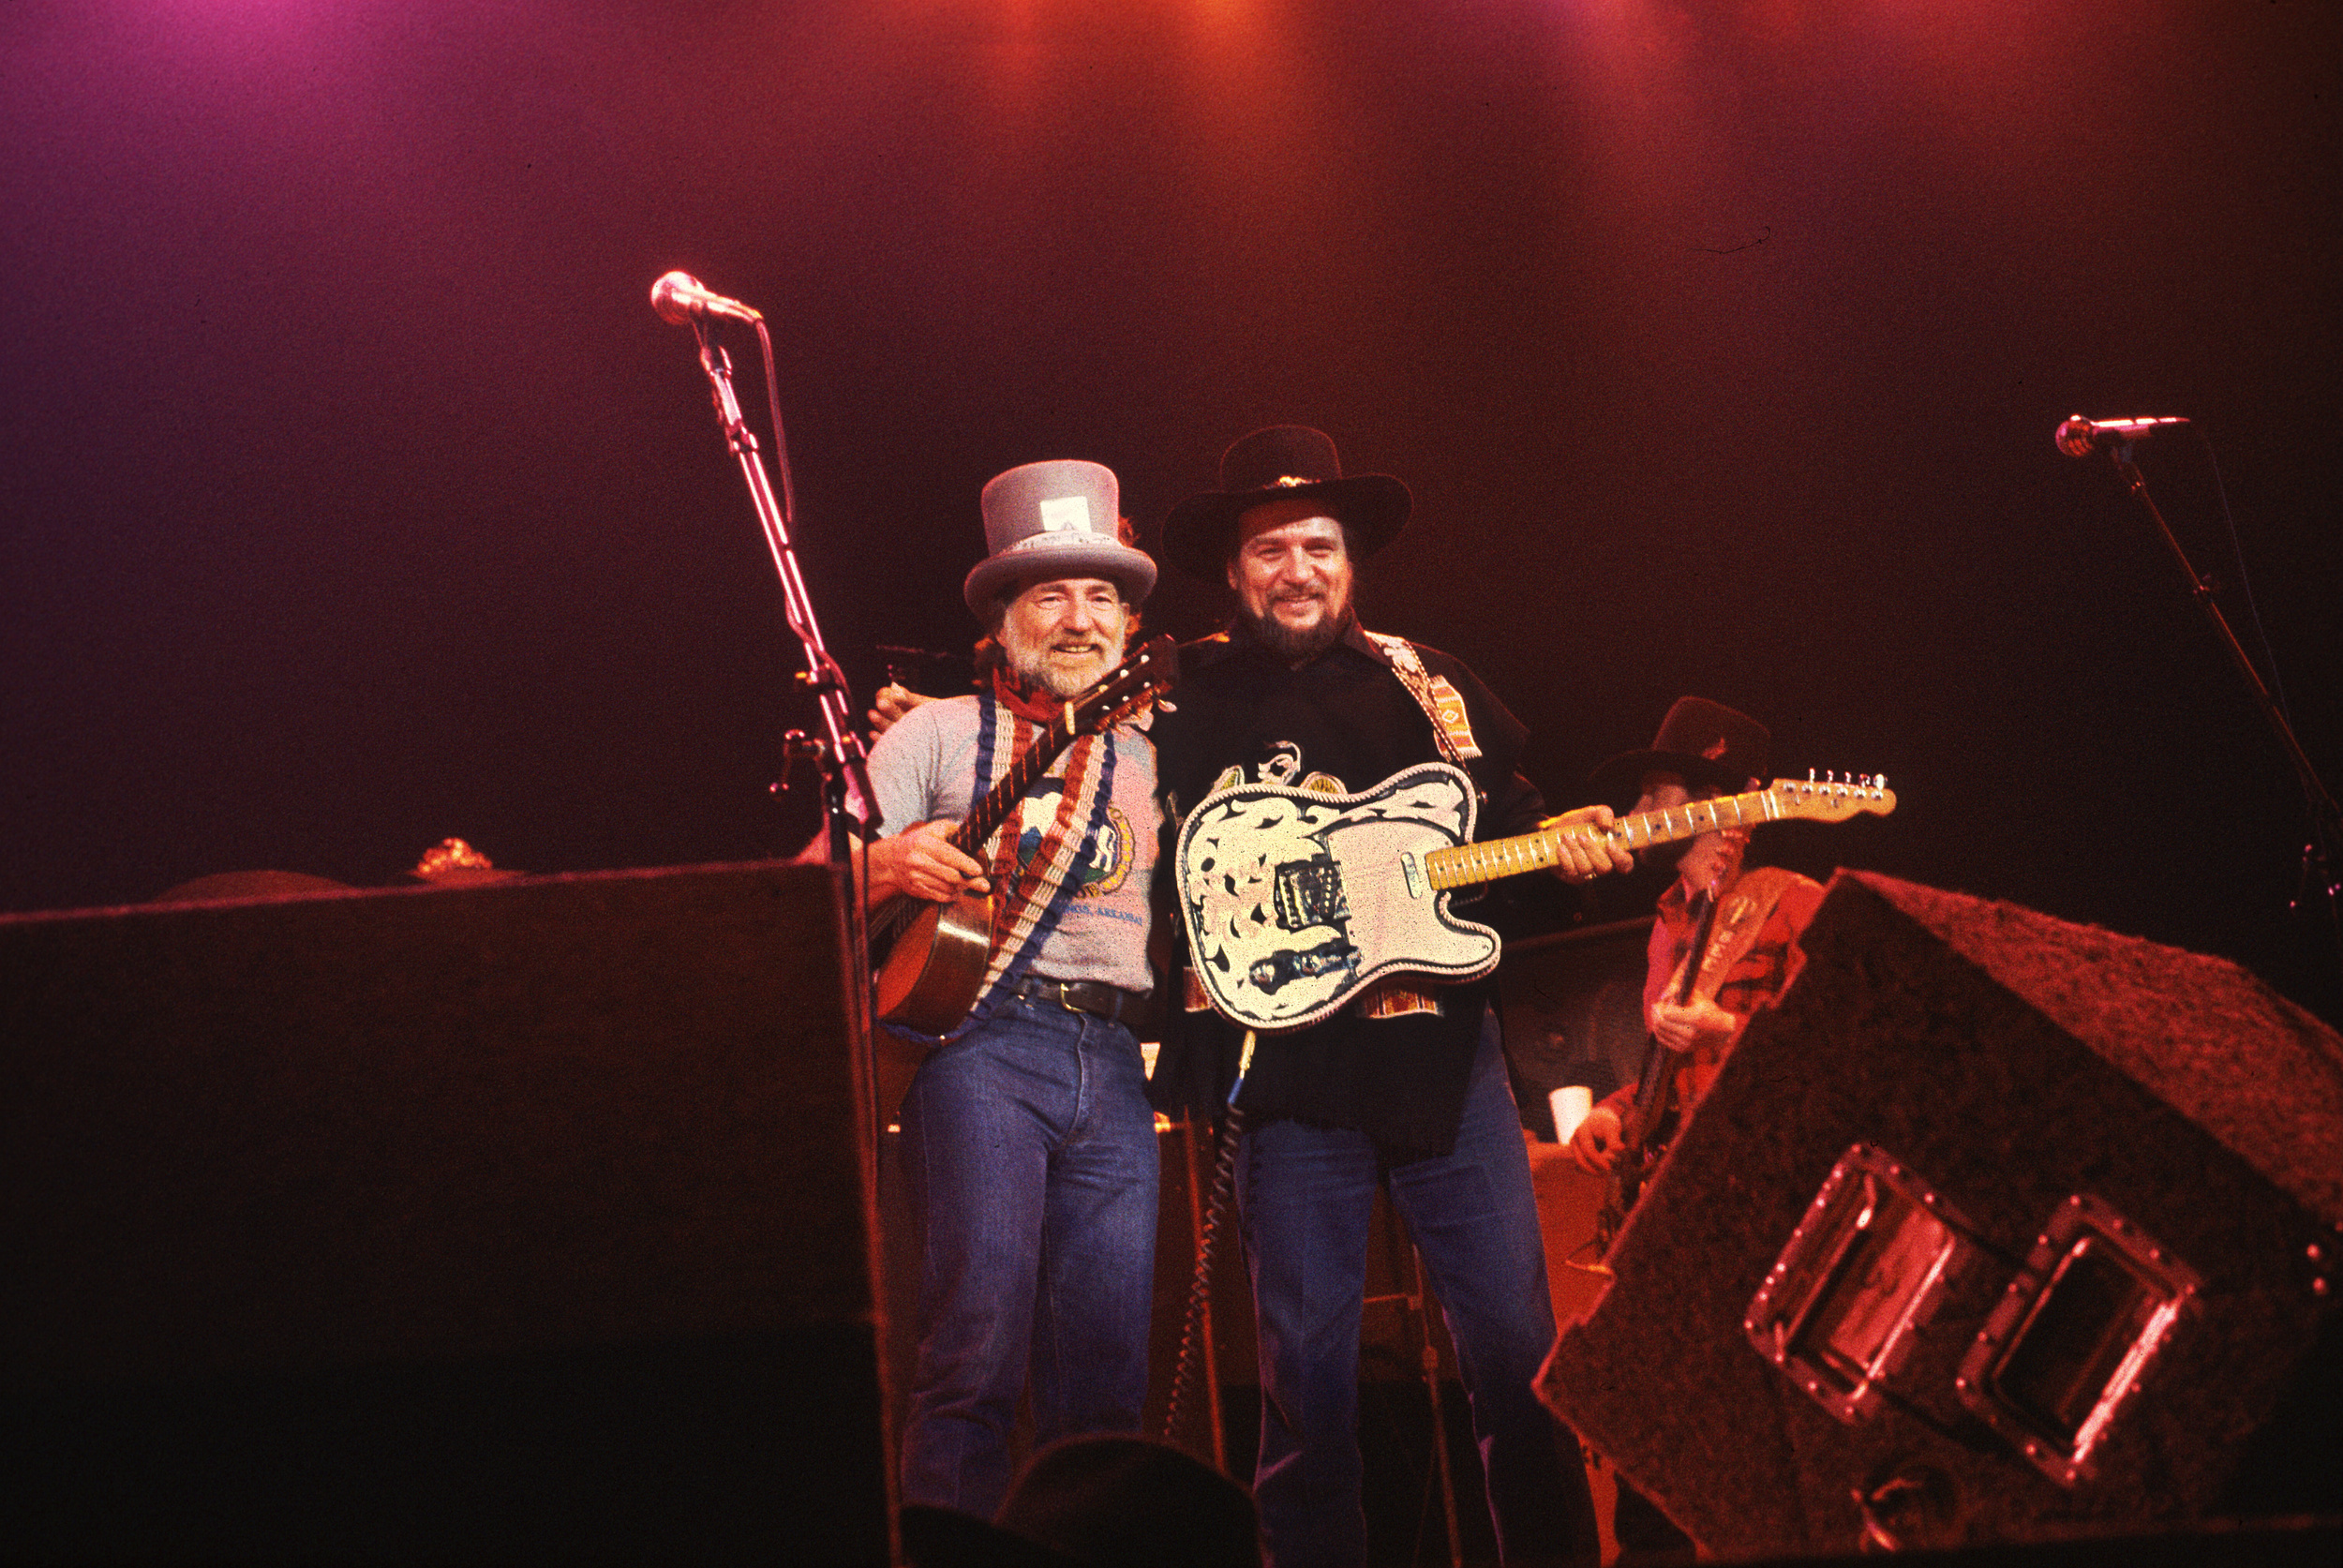 <p>Waylon Jennings and Willie Nelson offer some solid parenting advice in "Mammas Don't Let Your Babies Grow Up To Be Cowboys," a catchy tune about the rough-and-tumble lives of cowboys everywhere. The classic track was a #1 hit and earned the duo a Grammy Award for Best Country Performance by a Duo or Group With Vocal in 1979. </p><p>You may also like: <a href='https://www.yardbarker.com/entertainment/articles/the_30_most_influential_drummers/s1__38466391'>The 30 most influential drummers</a></p>